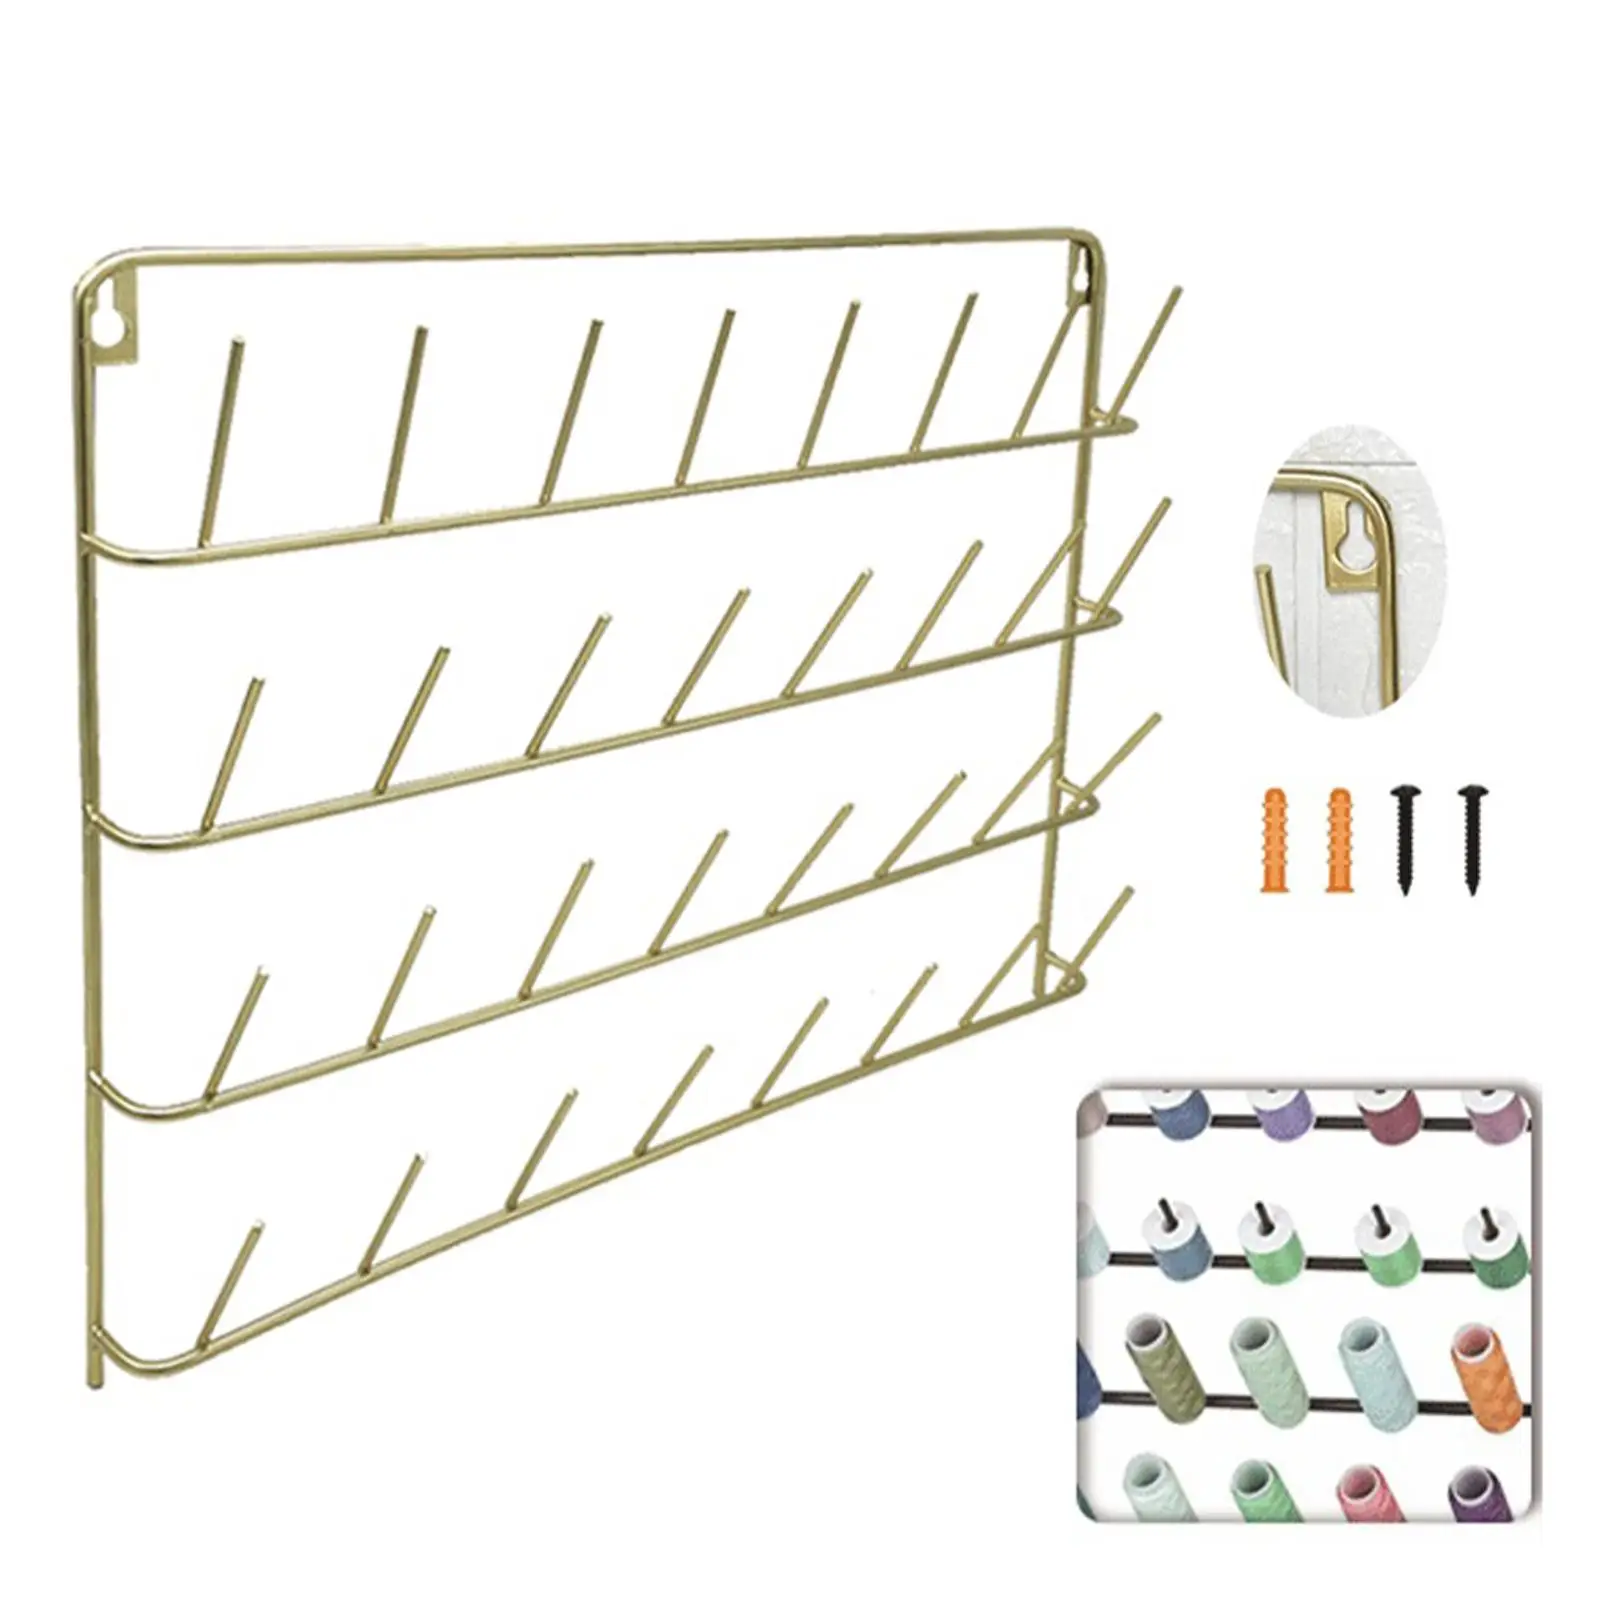 Large Sewing Thread Rack Wall Mount Accessories Gold Hanging Tools Seperator Organizer Thread Holder for Sewing Hair Braiding